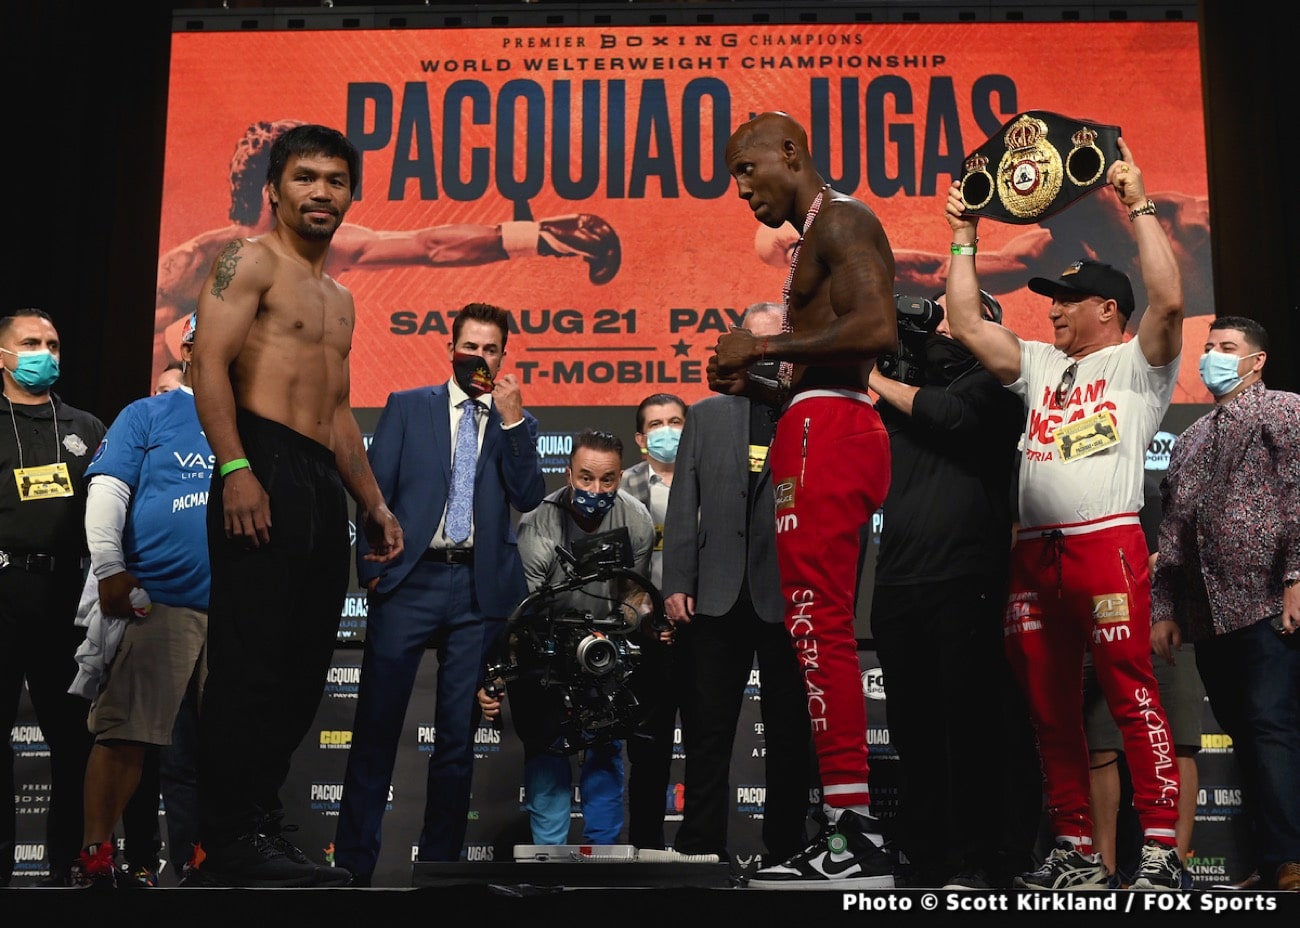 Image: Manny Pacquiao 146 vs. Yordenis Ugas - 147 - weigh-in results